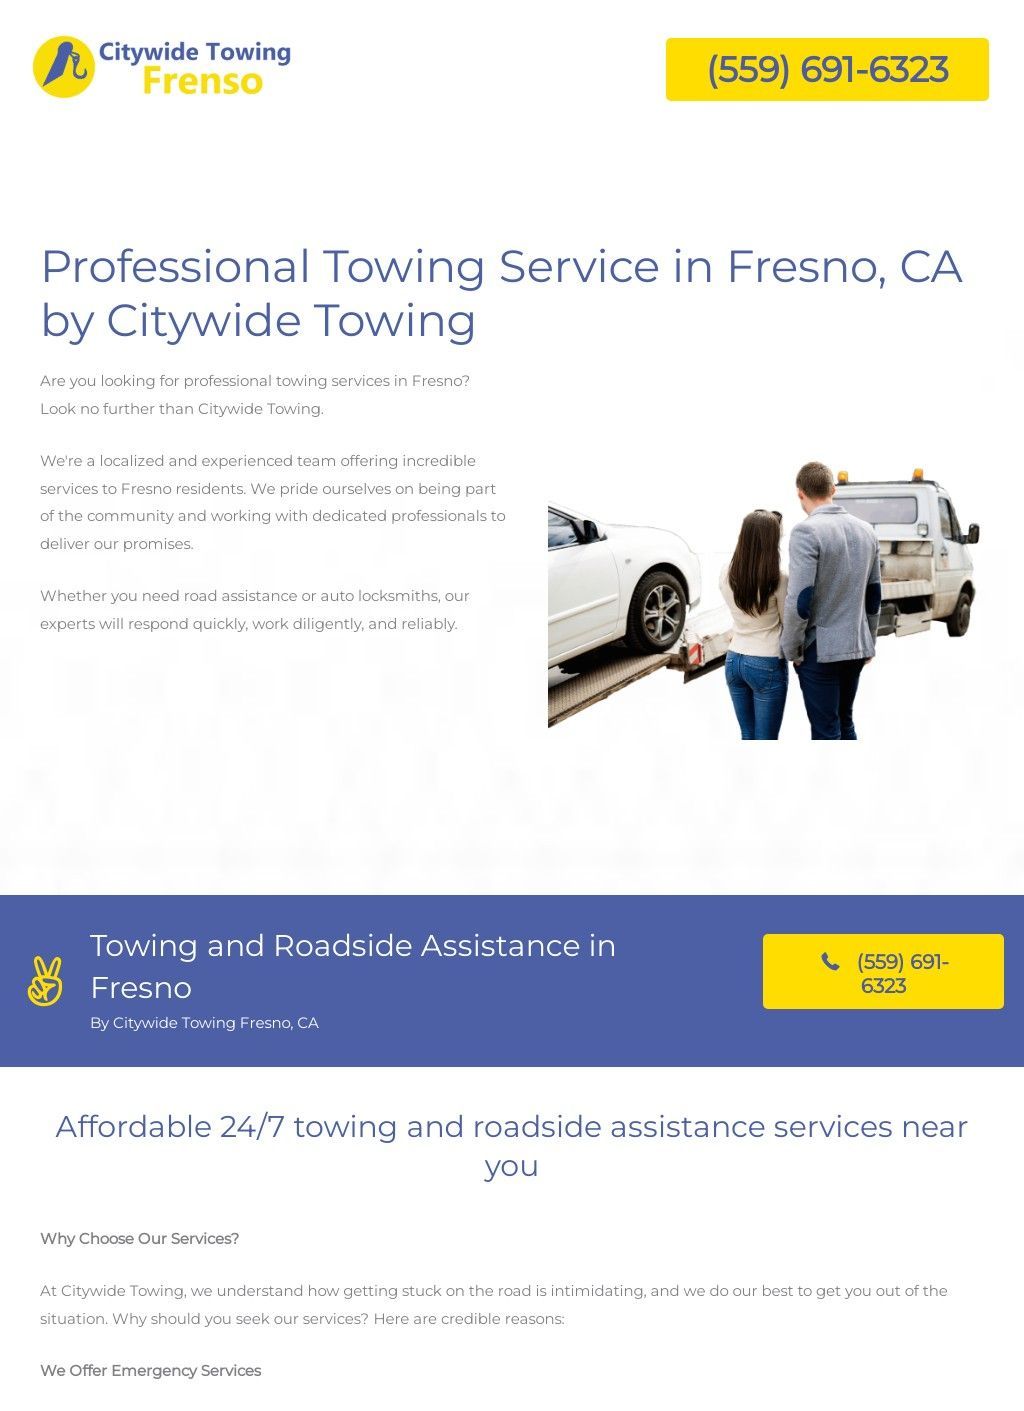 Citywide Towing in Fresno, CA